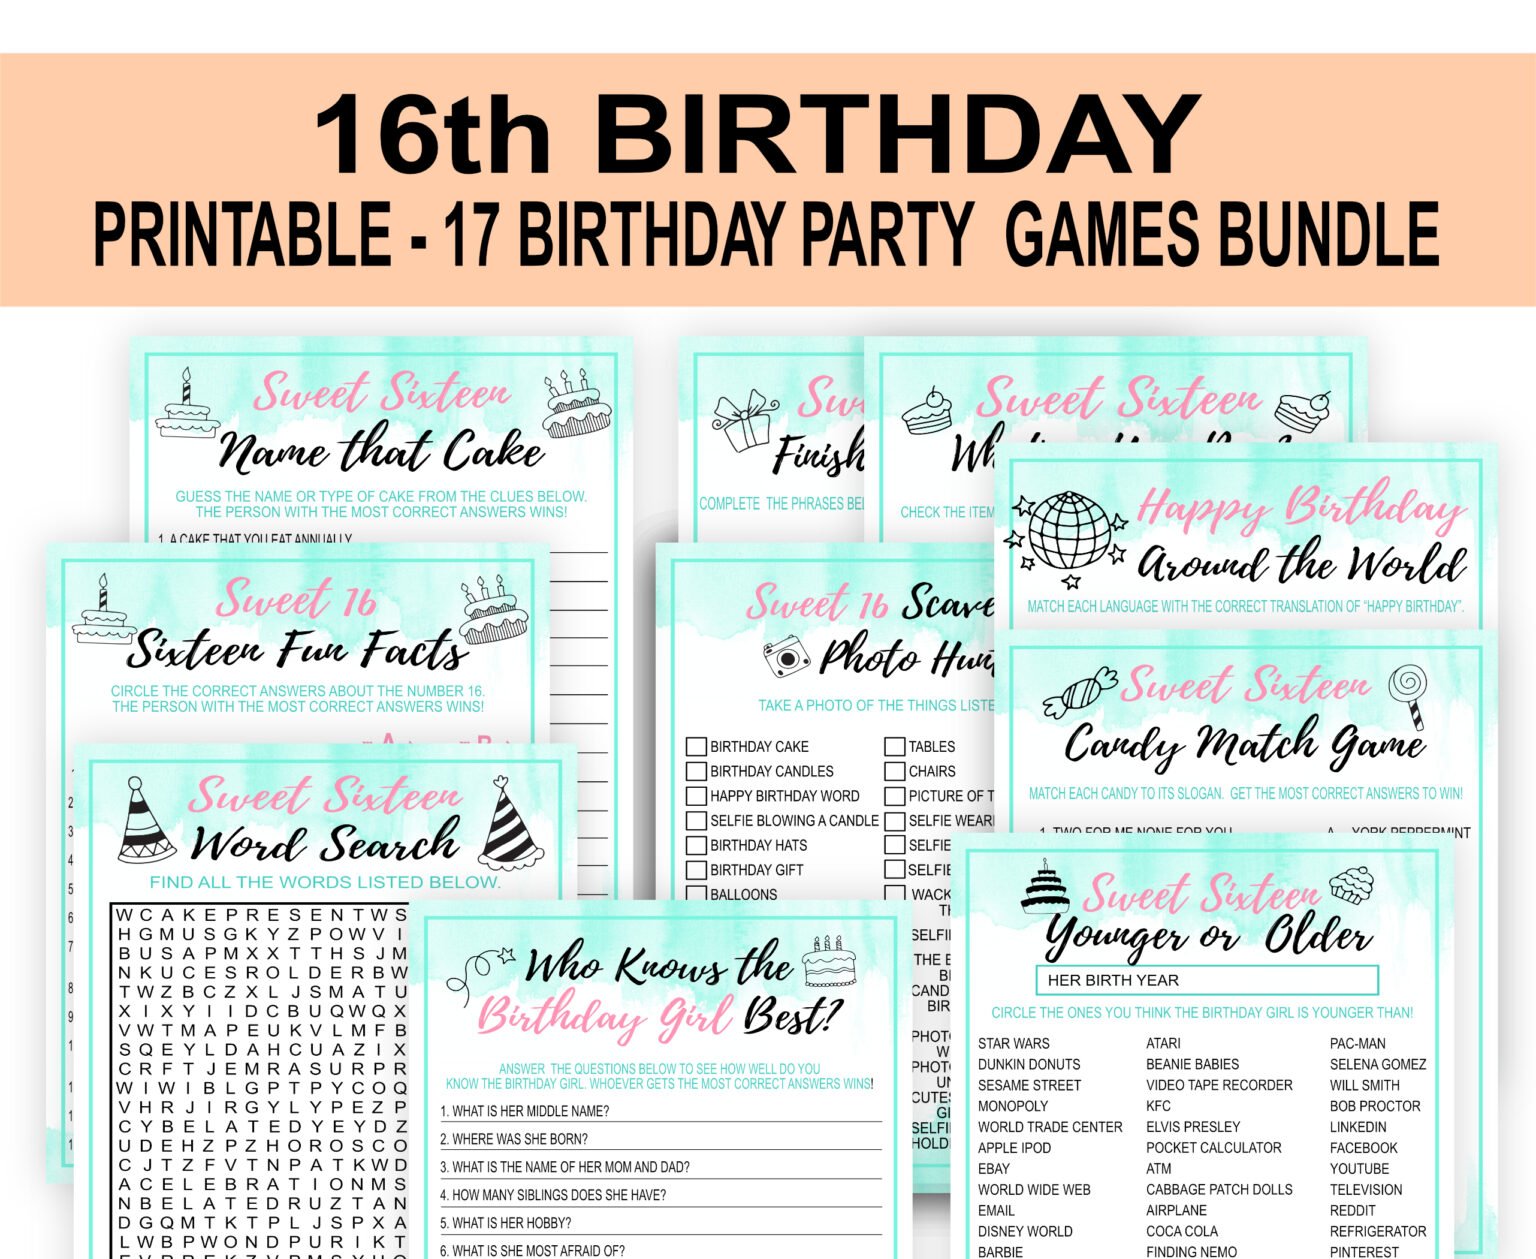 Mint and Pink Sweet Sixteen Birthday Party Games Bundle for Girls